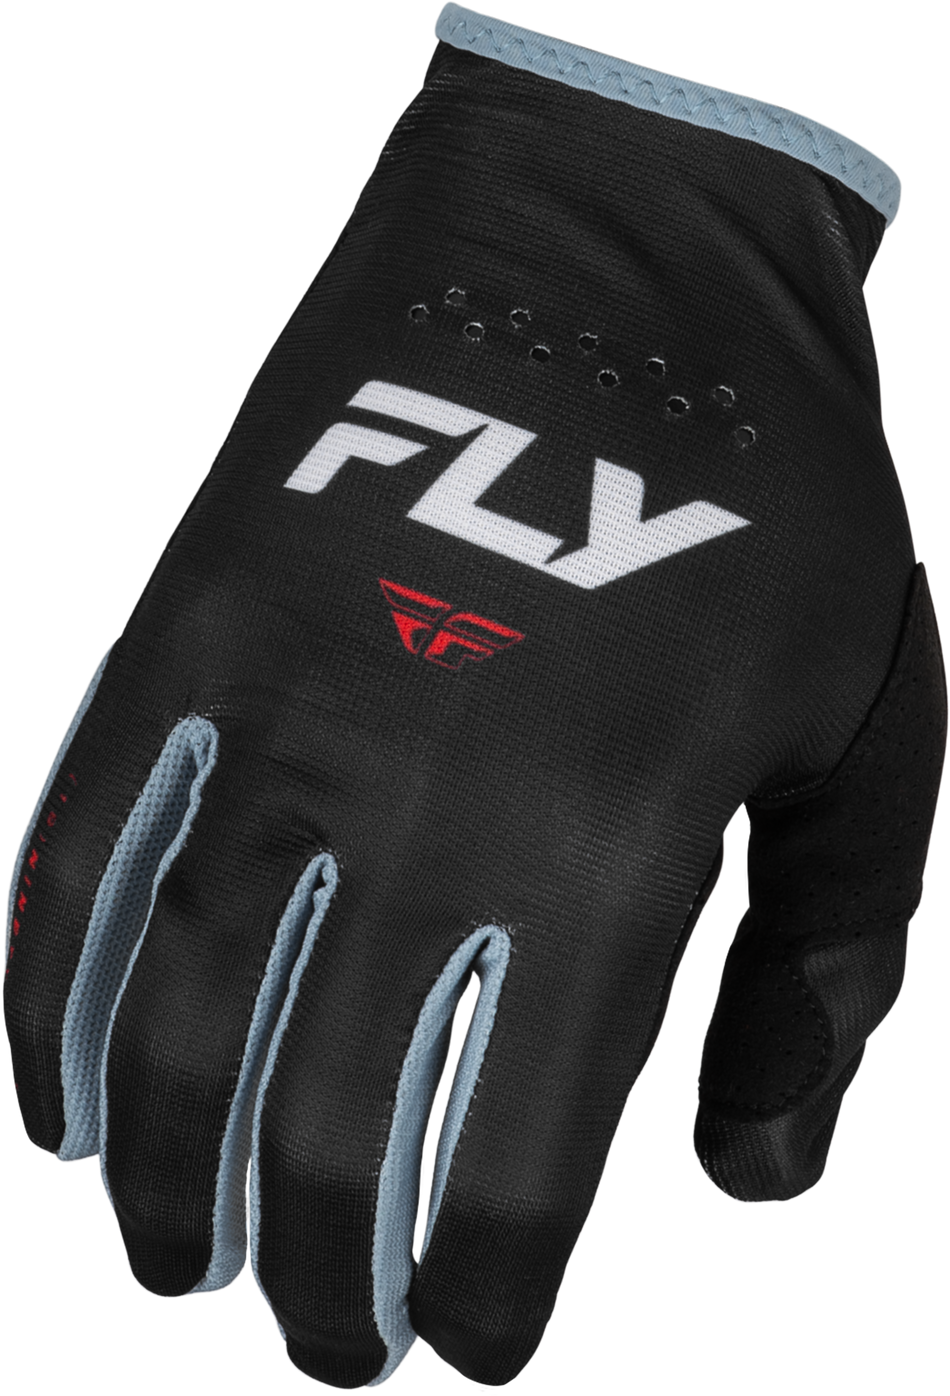 FLY RACING Youth Lite Gloves Black/White/Red Ym 377-710YM